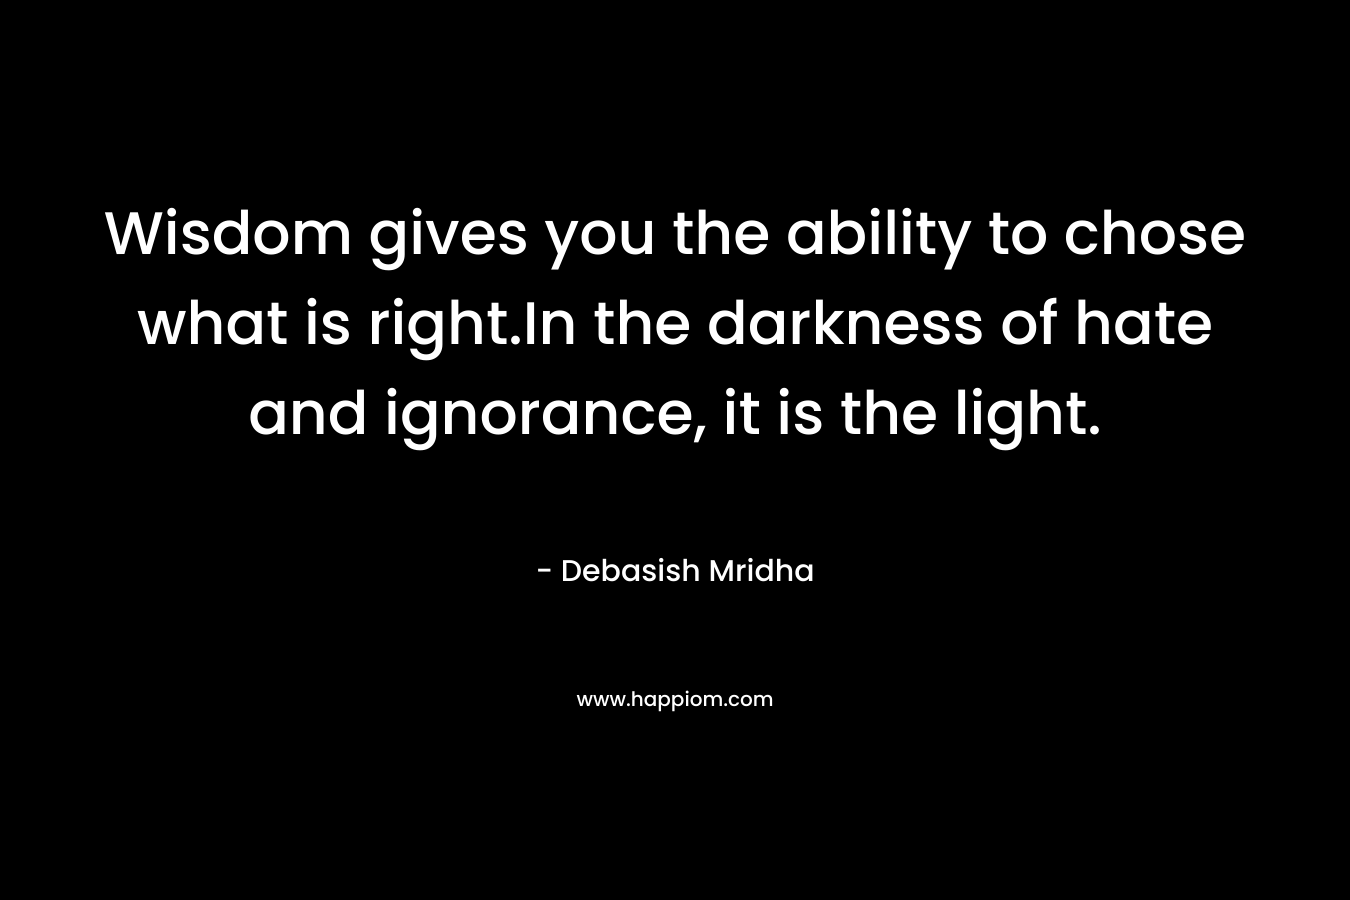 Wisdom gives you the ability to chose what is right.In the darkness of hate and ignorance, it is the light.